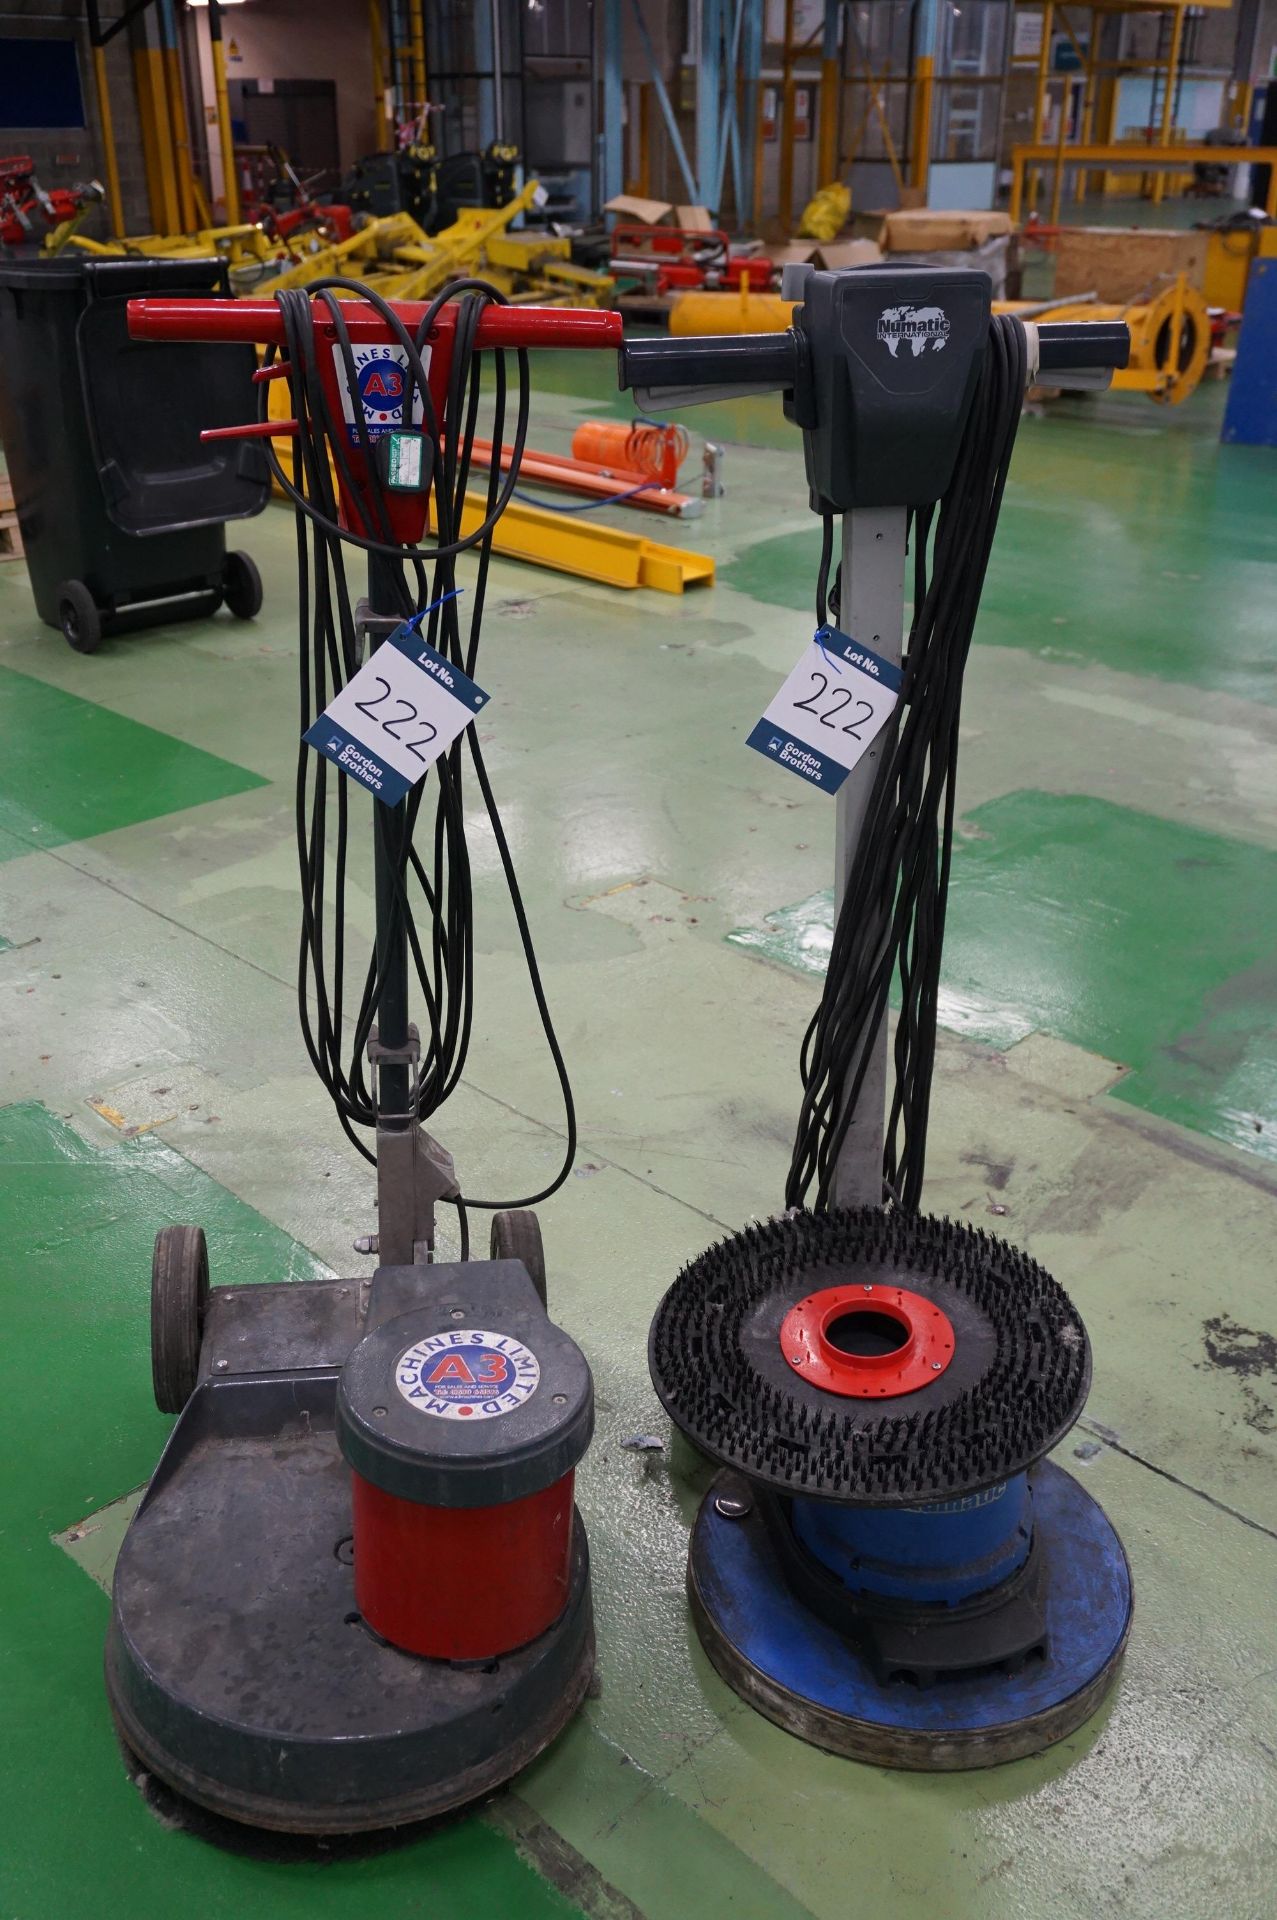 1 x A3 Machinery limited rotary floor scrubber with 1 x Numatic international rotary floor scrubber